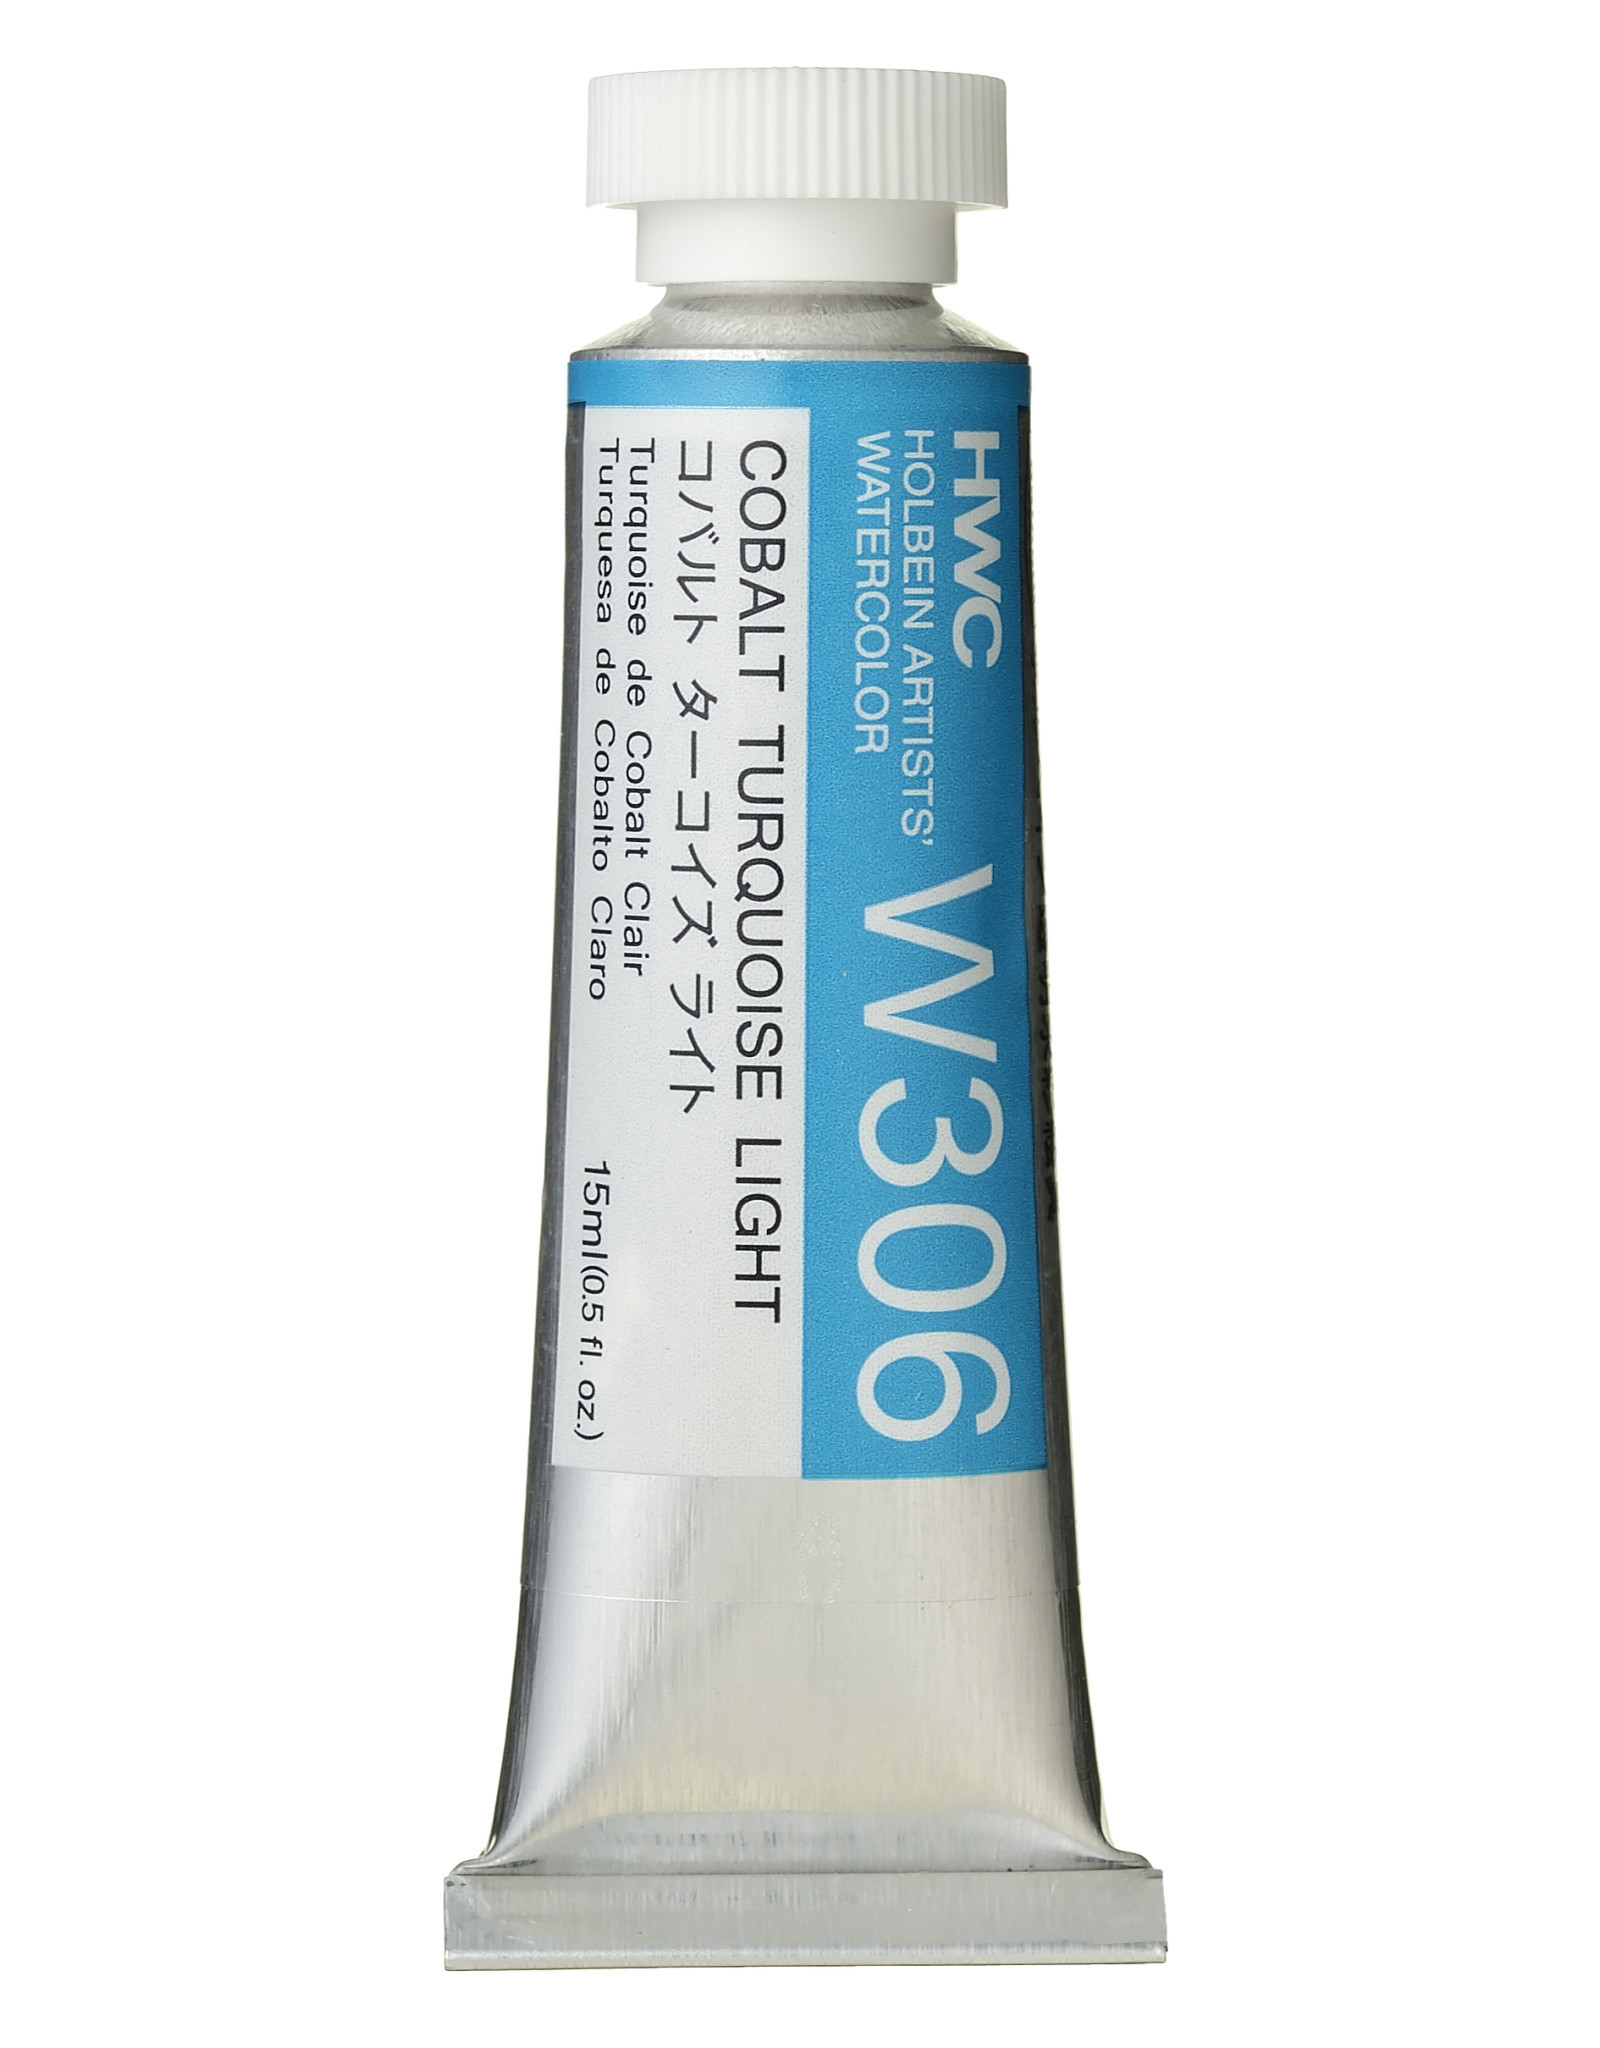 HOLBEIN Holbein Artist’s Watercolor, Cobalt Turquoise Light 15ml